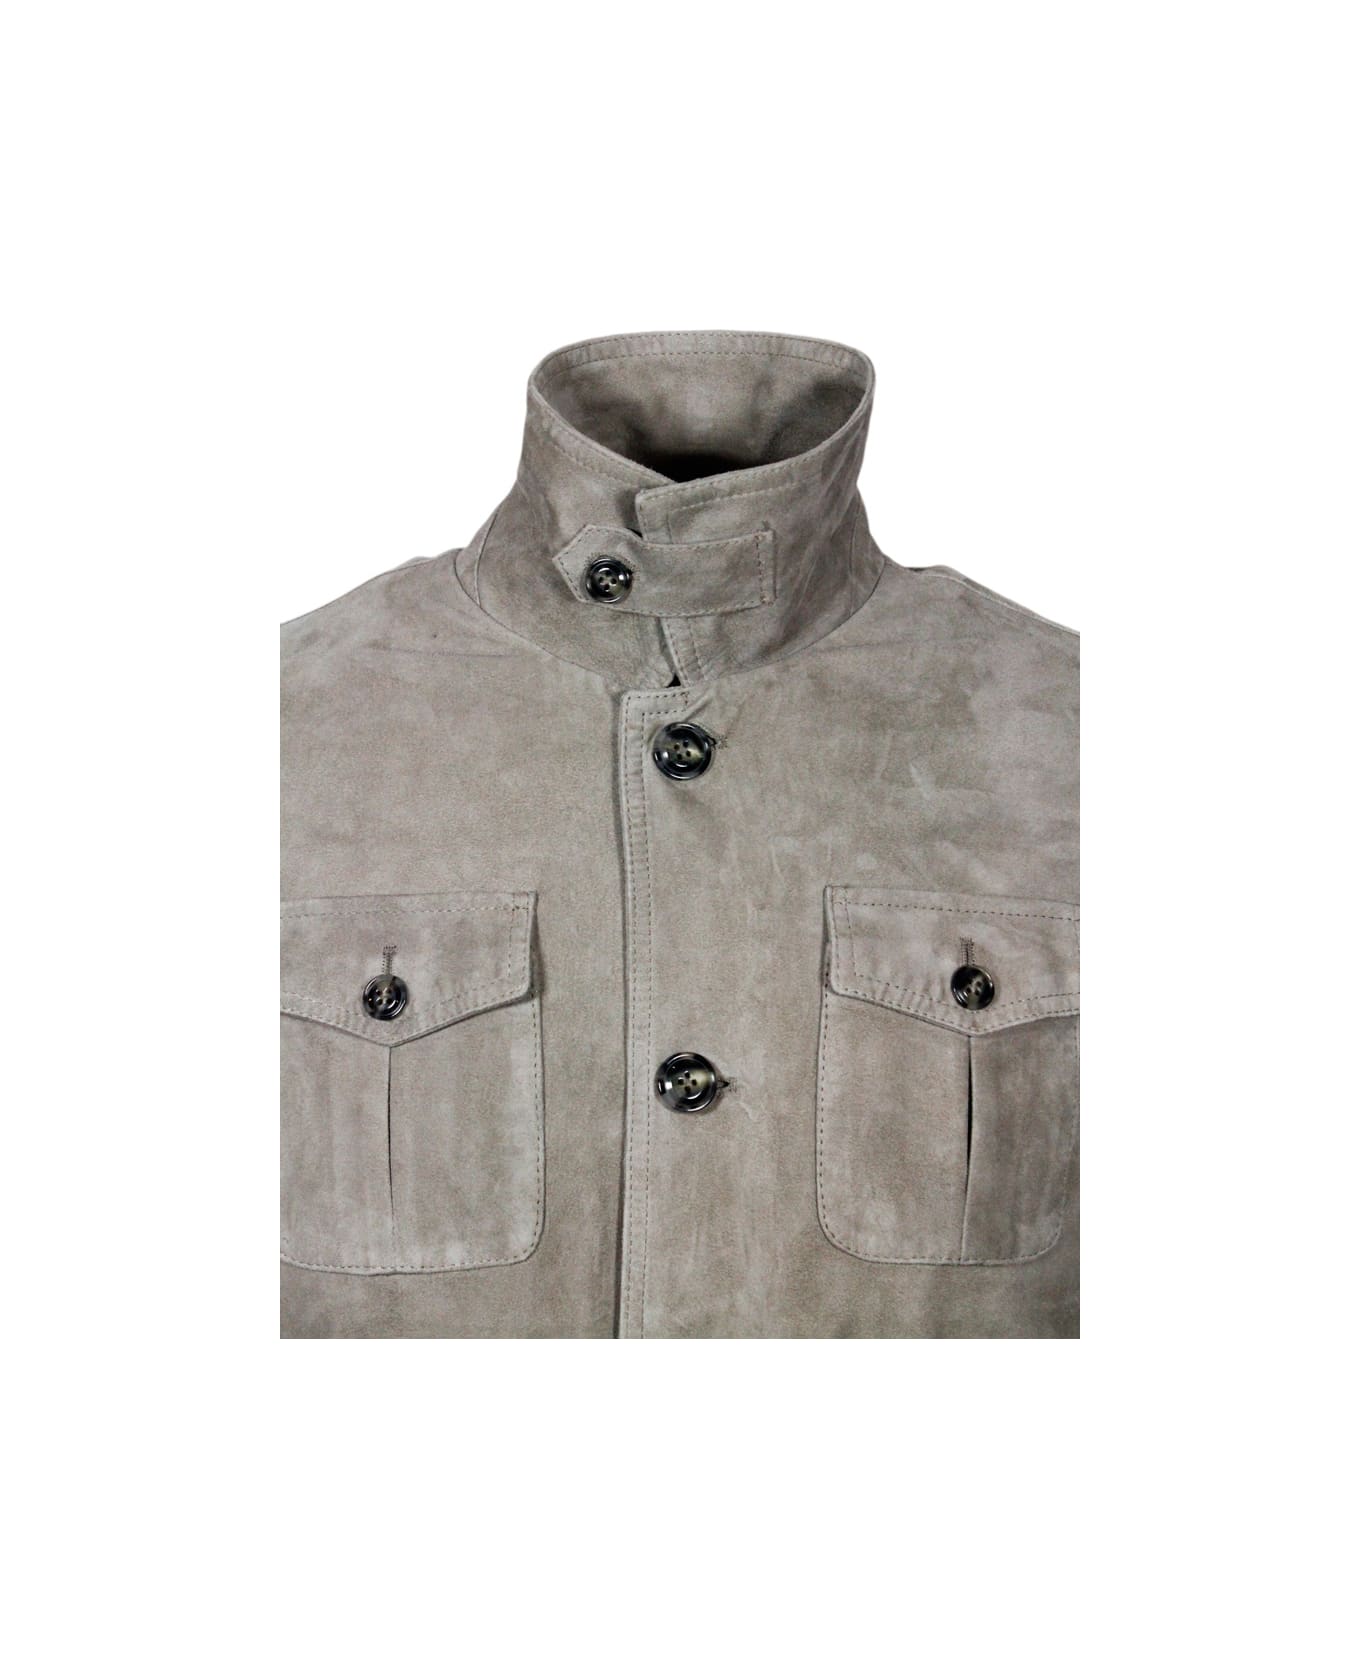 Barba Napoli Bomber Jacket In Soft Stretch Suede With Button Closure And Cuffs And Knitted Bottom. Interior In Cotton Jersey - Beige ジャケット